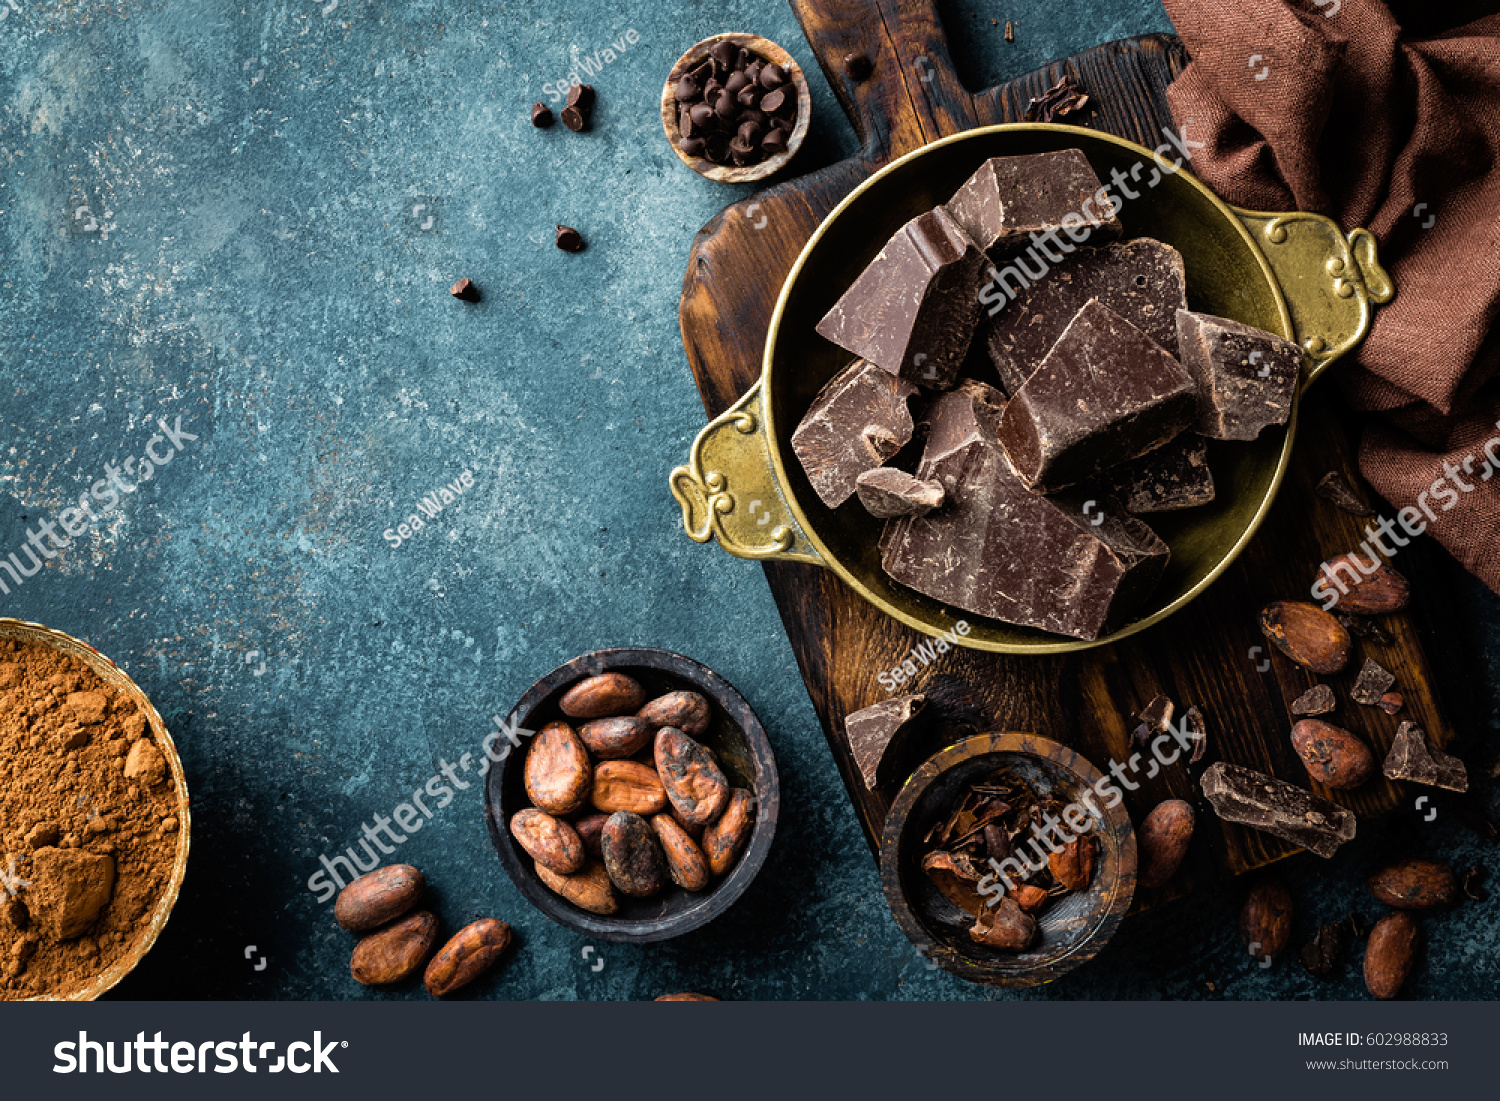 Dark chocolate pieces crushed and cocoa beans, culinary background, top view #602988833